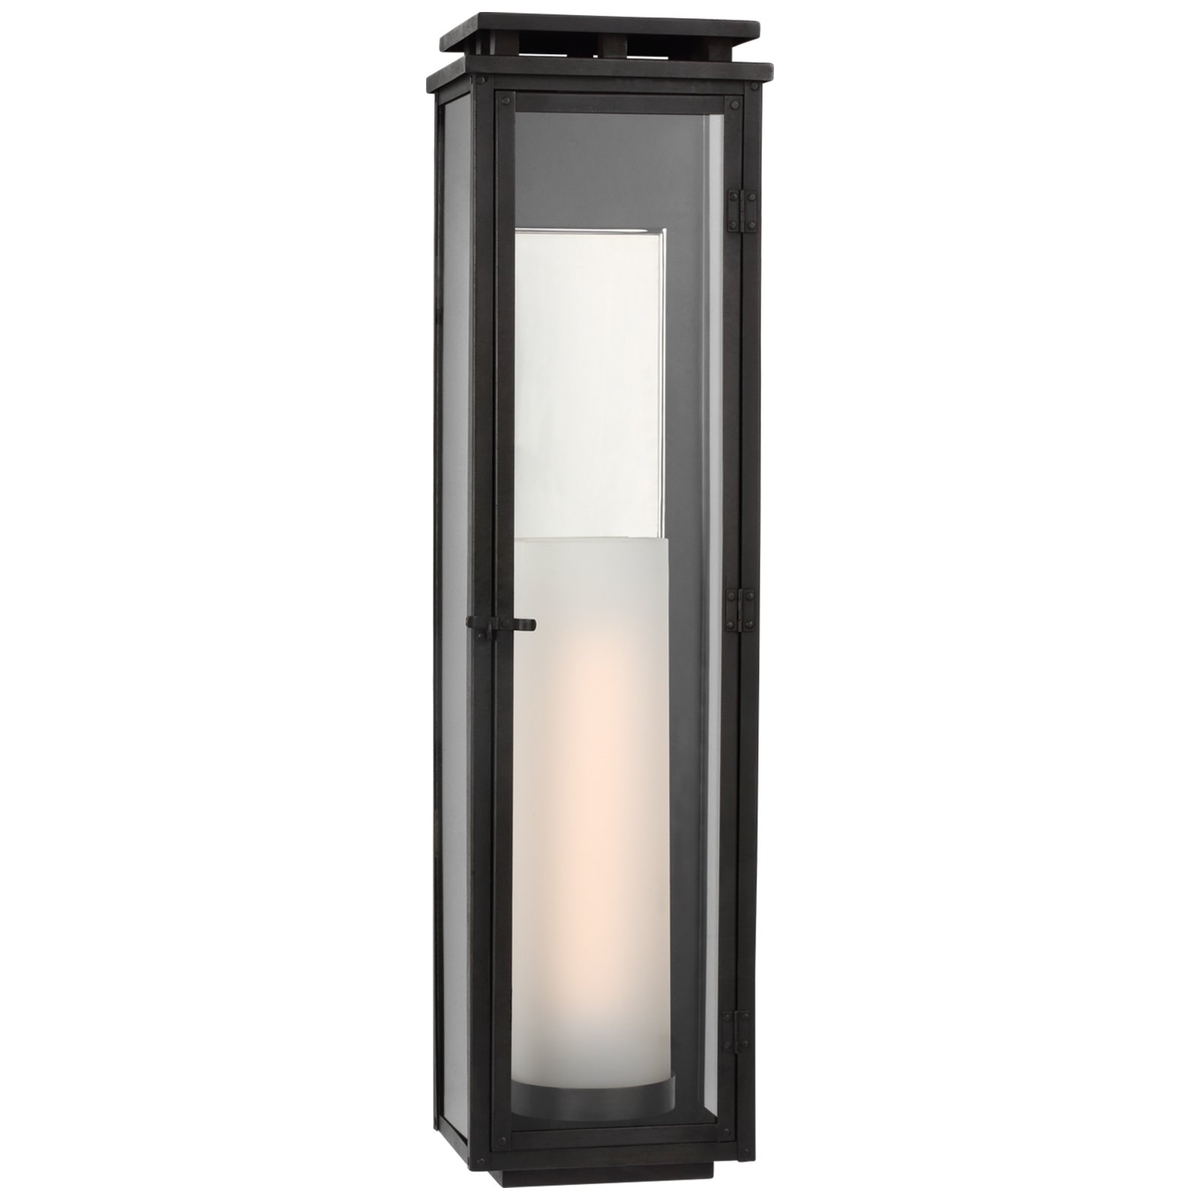 Cheshire Tall Outdoor Wall Lantern